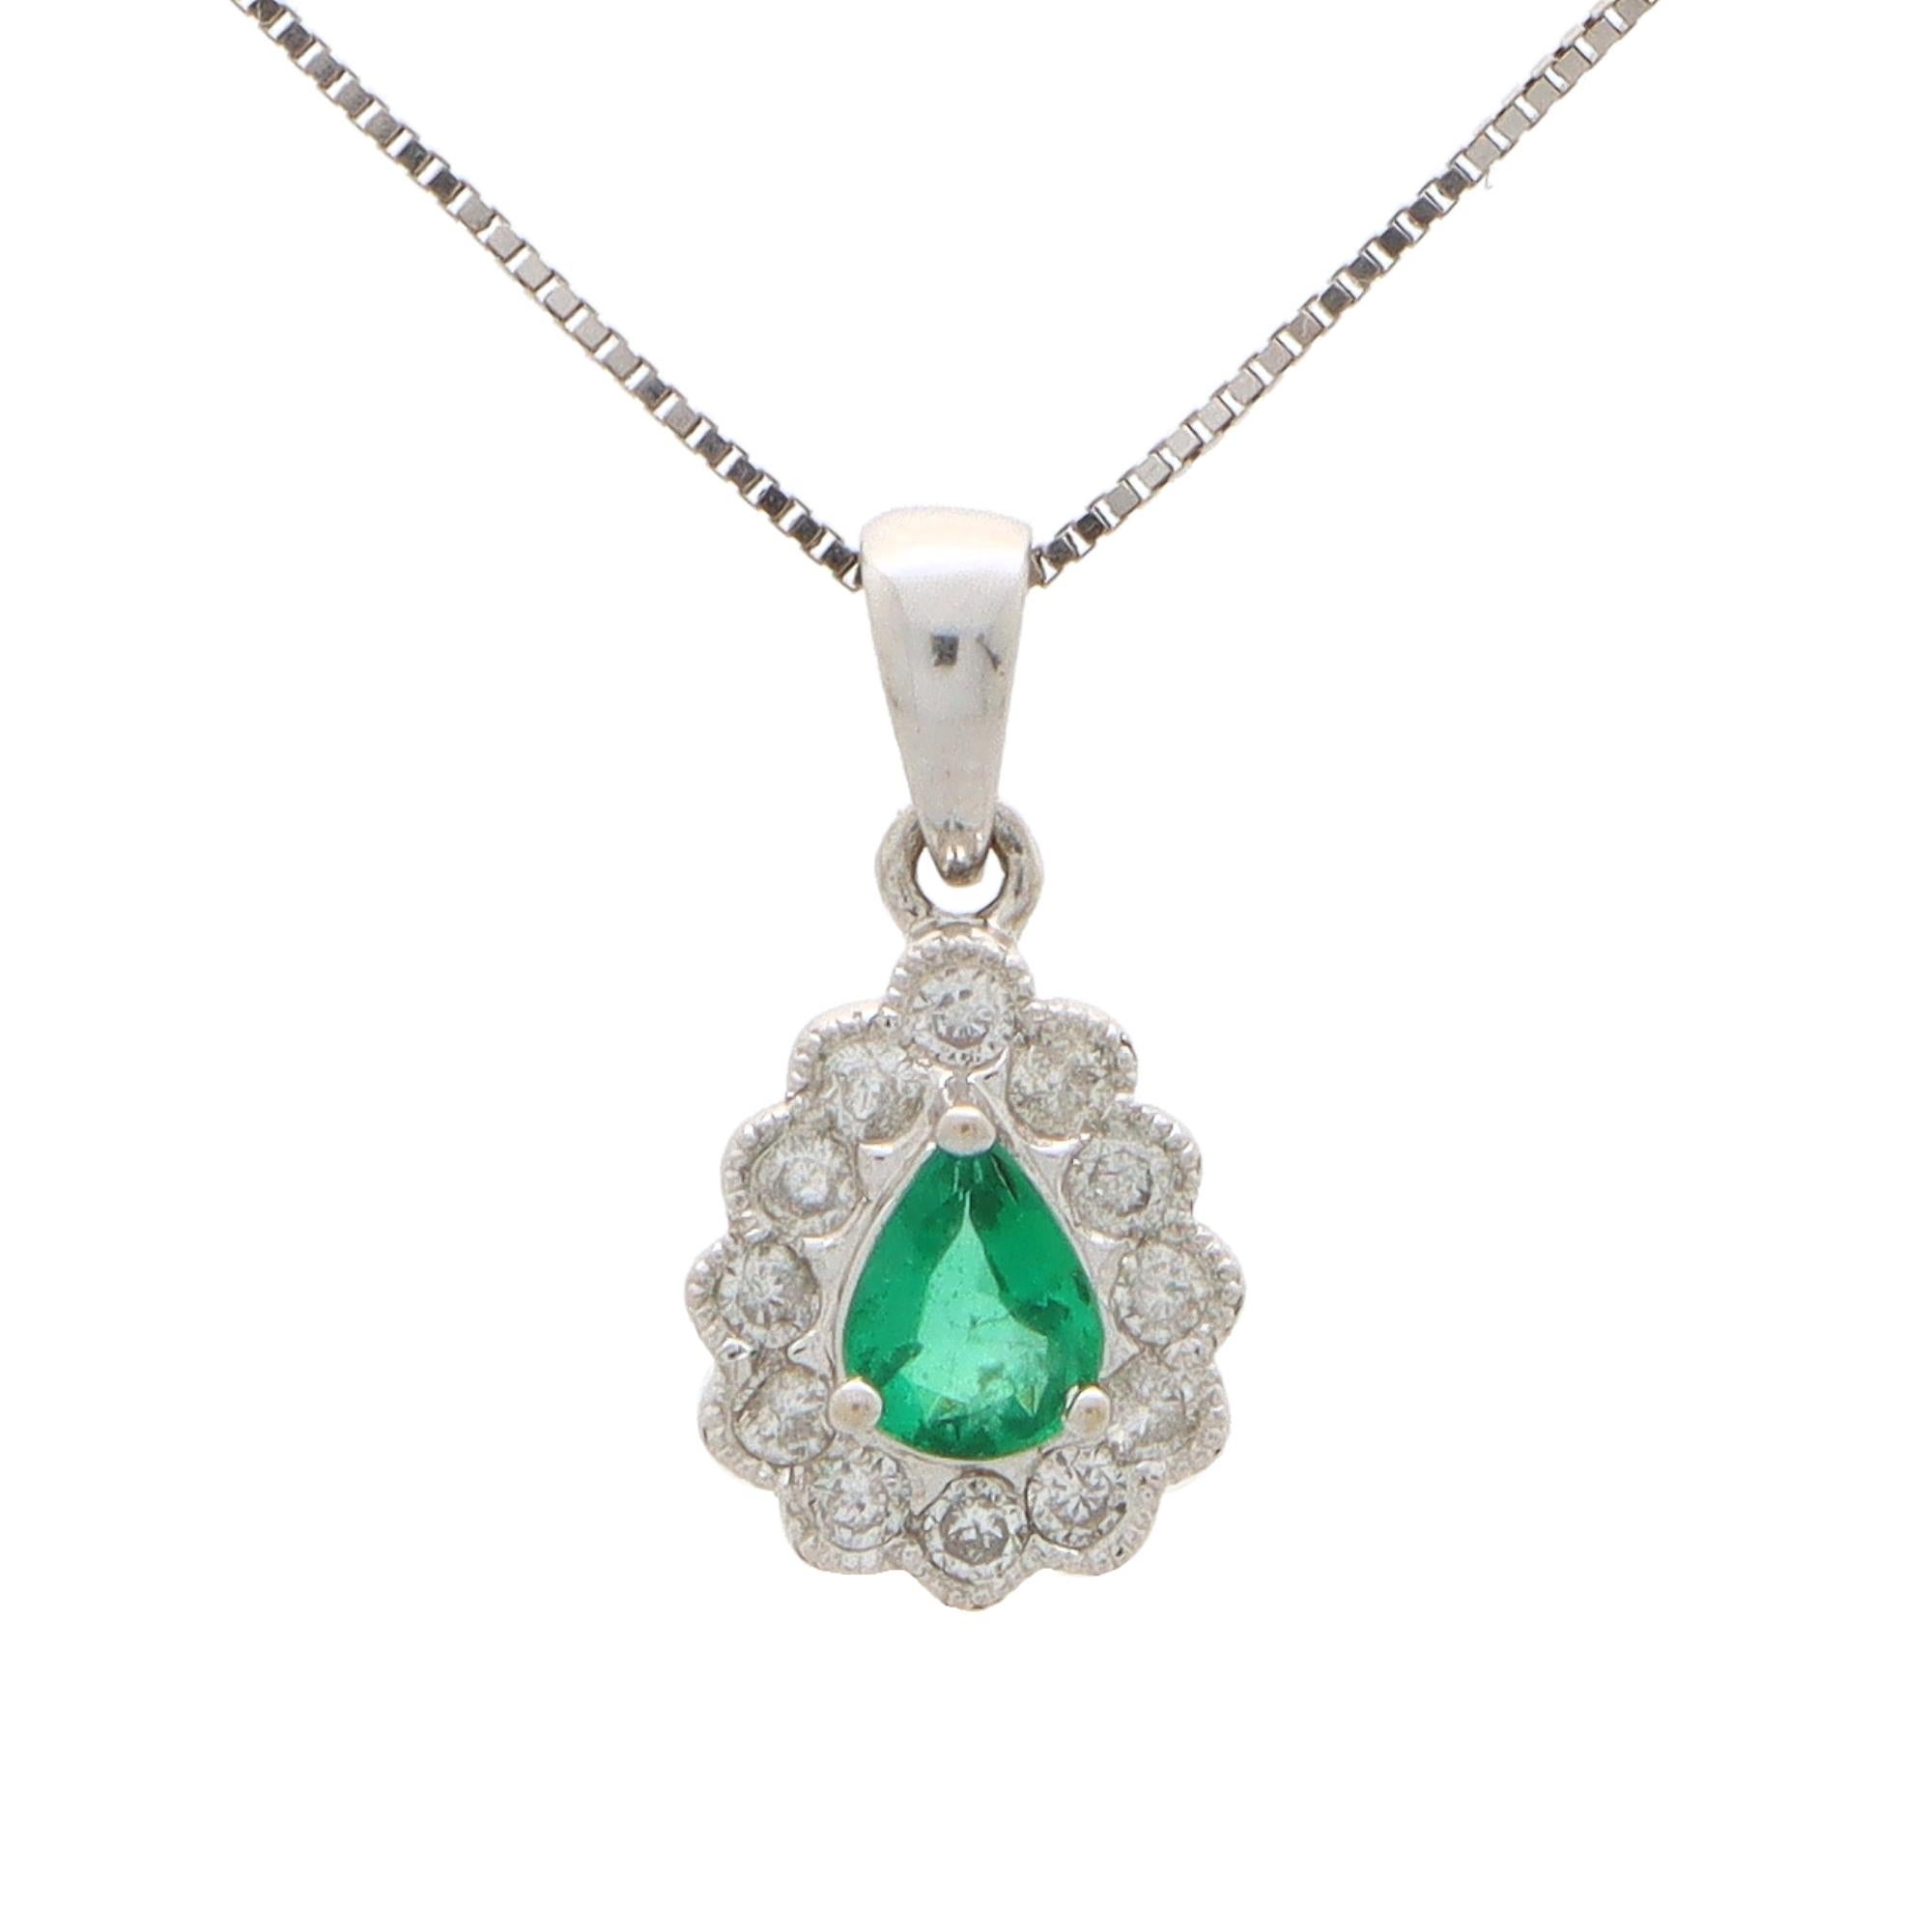 A beautiful pear cut emerald and diamond cluster pendant set in 18k white gold.

The pendant is centrally set with a beautiful coloured vibrant green pear cut emerald which is surrounded by 12 sparkly round brilliant cut diamonds. The pendant hangs